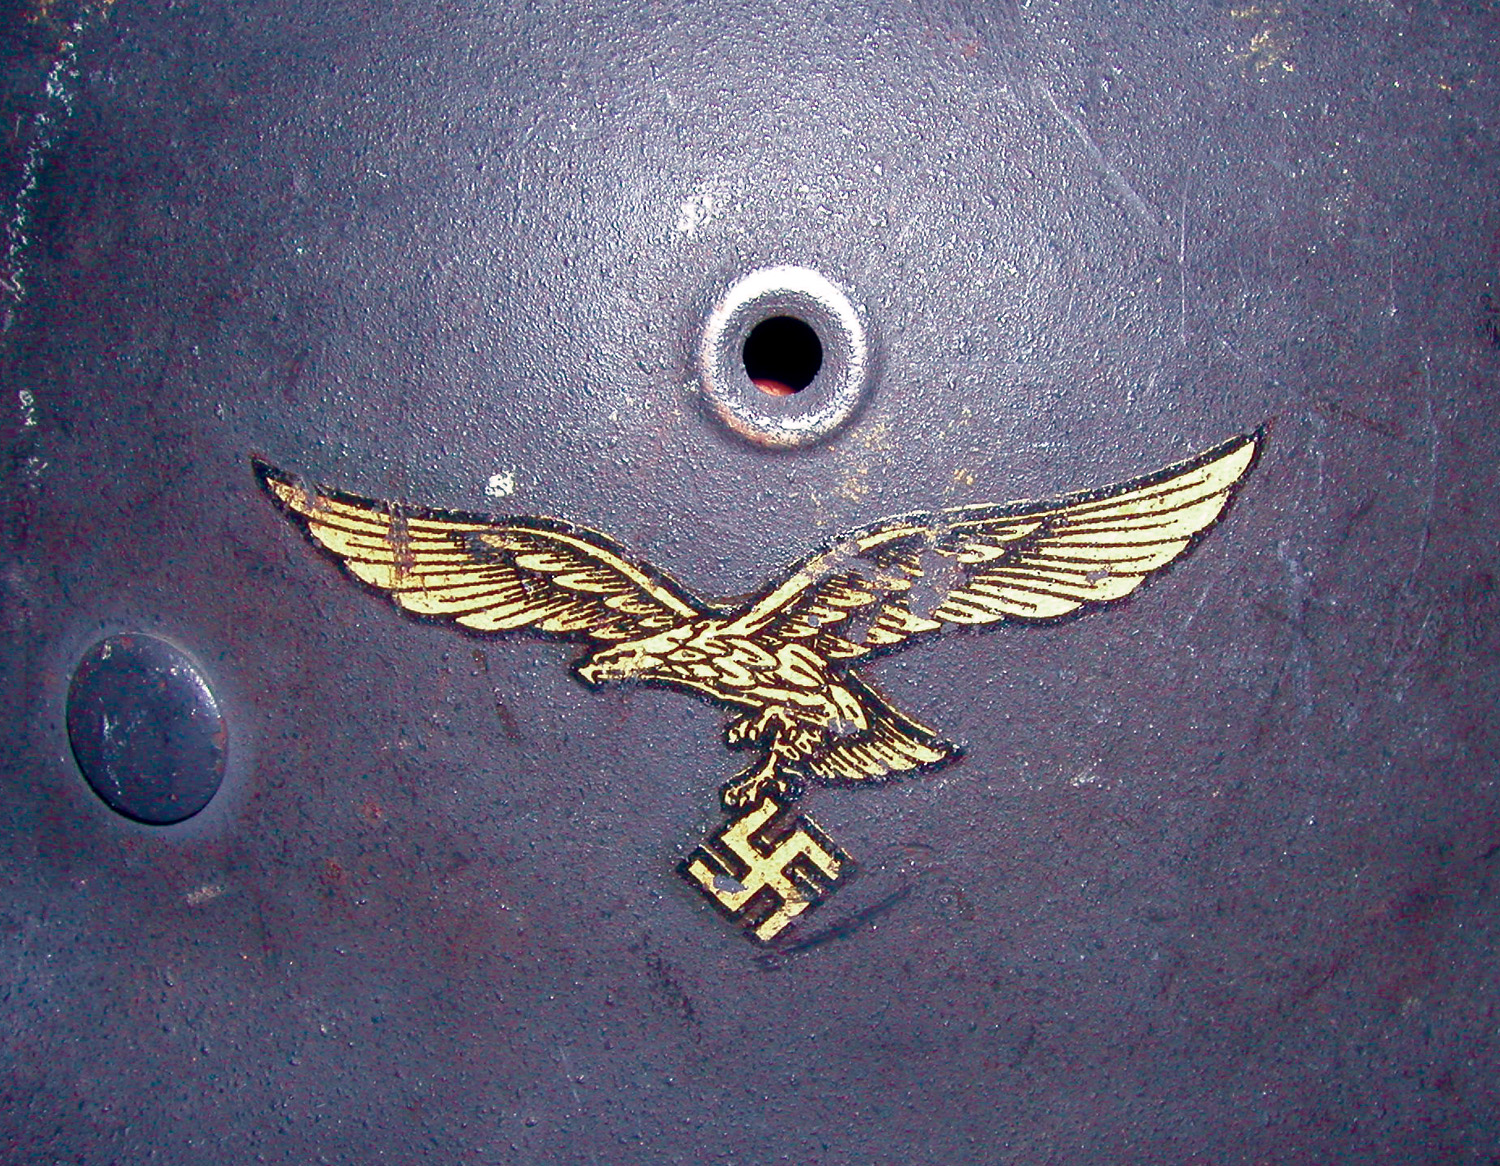 A Luftwaffe decal attached to its helmet.